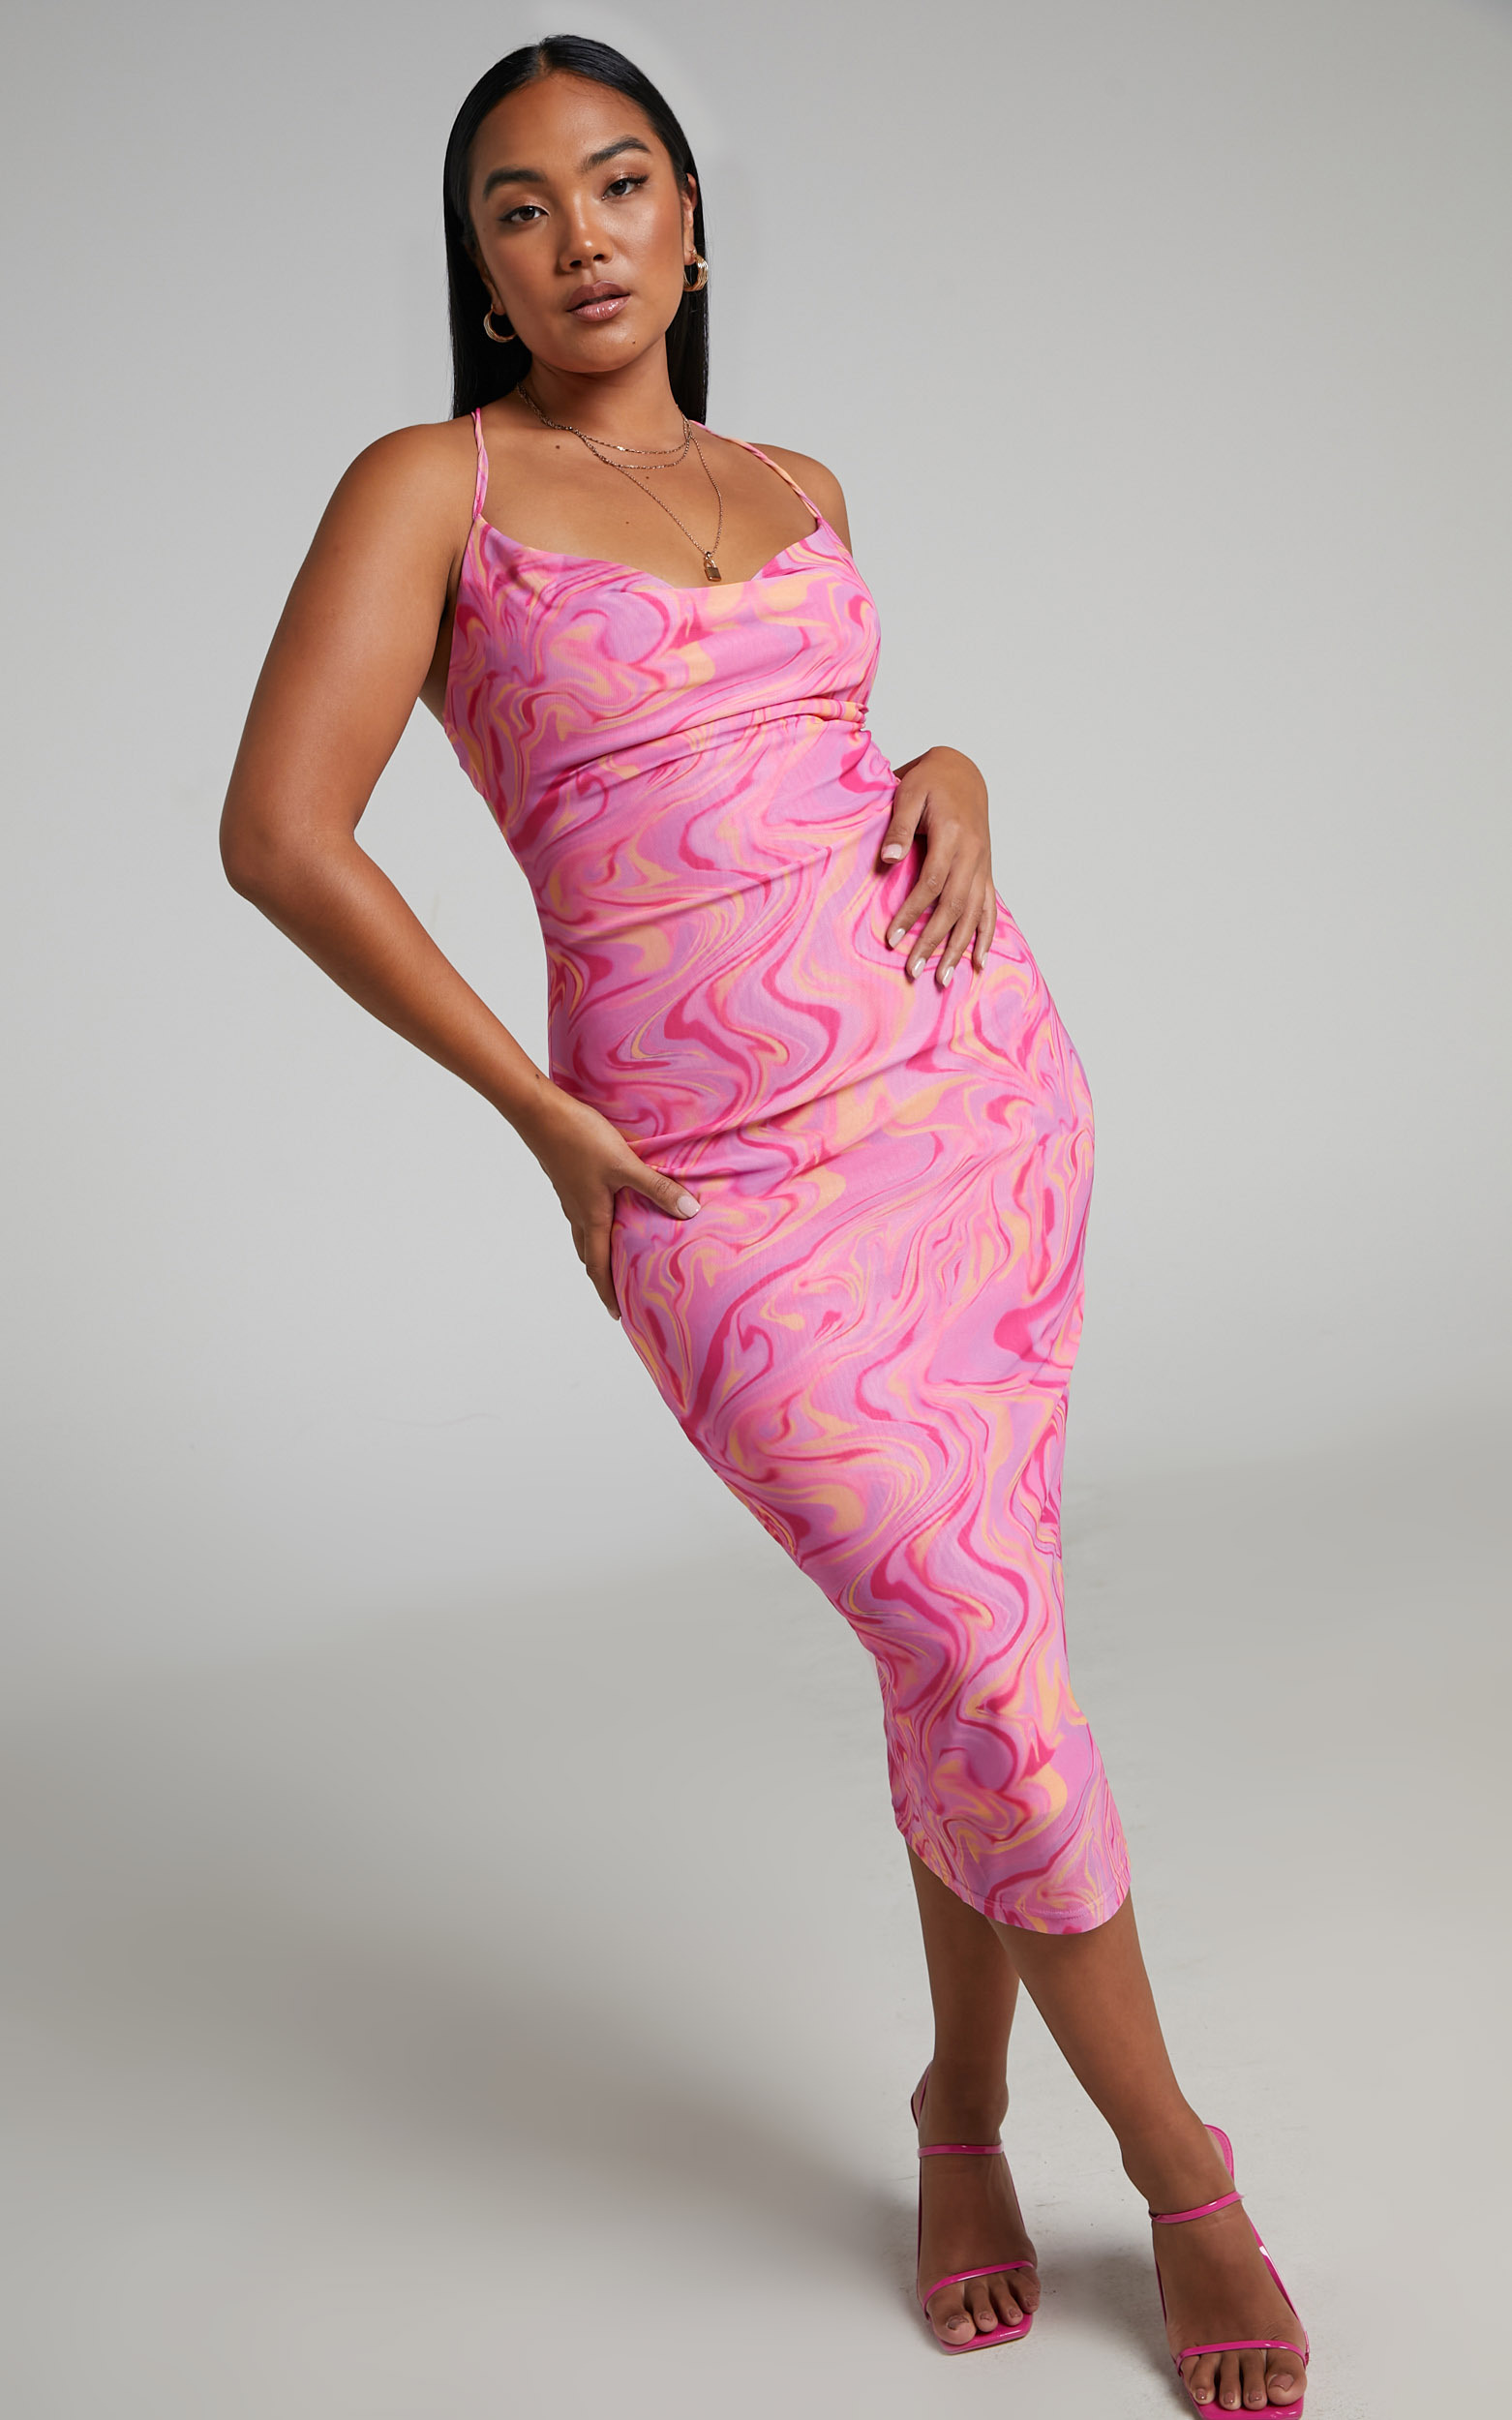 Helga Cowl Neck Ruched Midi Dress in Mesh in Pink Swirl - 04, PNK1, hi-res image number null